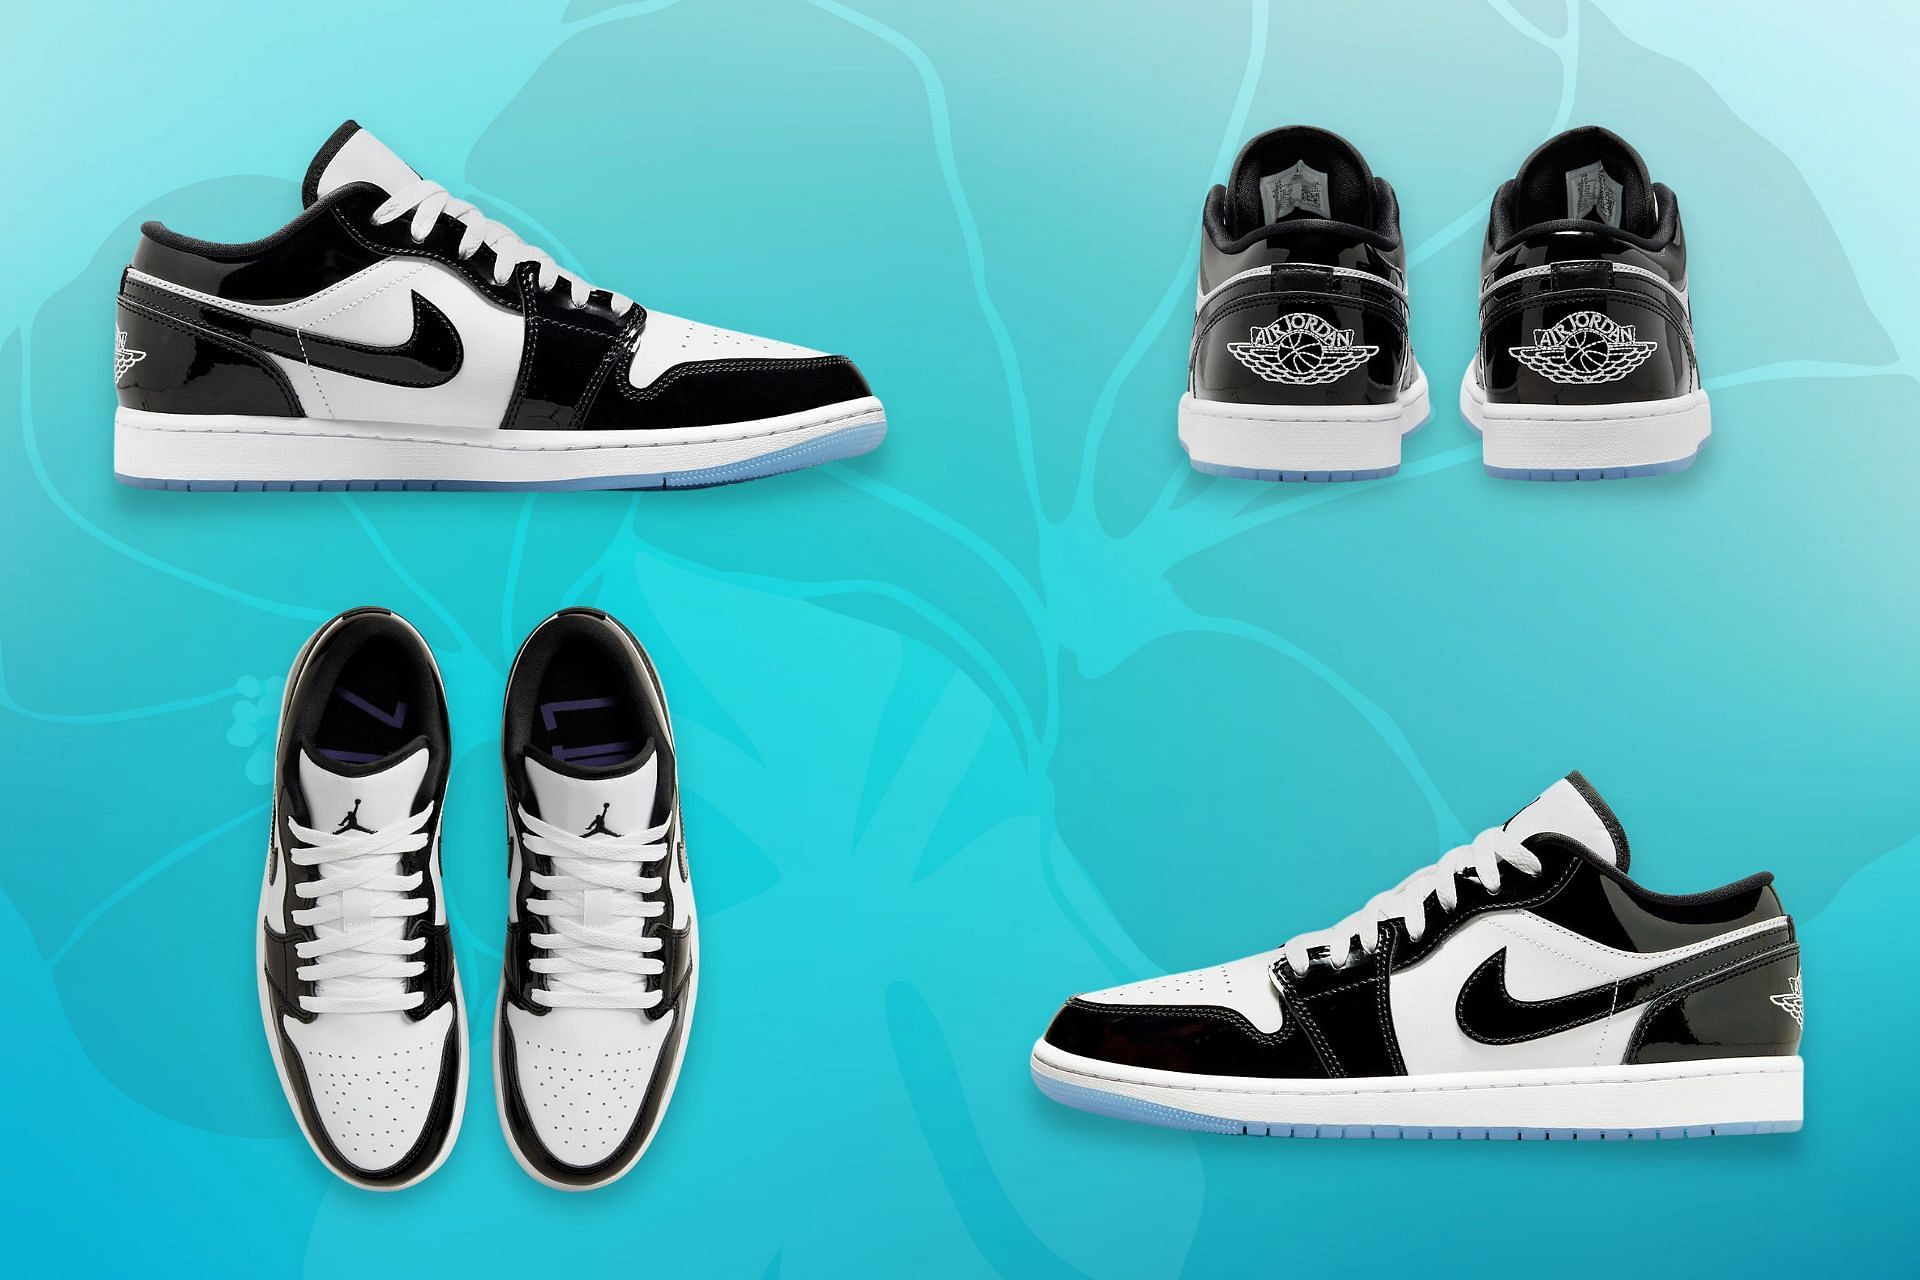 Nike Air Jordan 1 Low "Concord" sneakers: Where to buy, price and more  explored